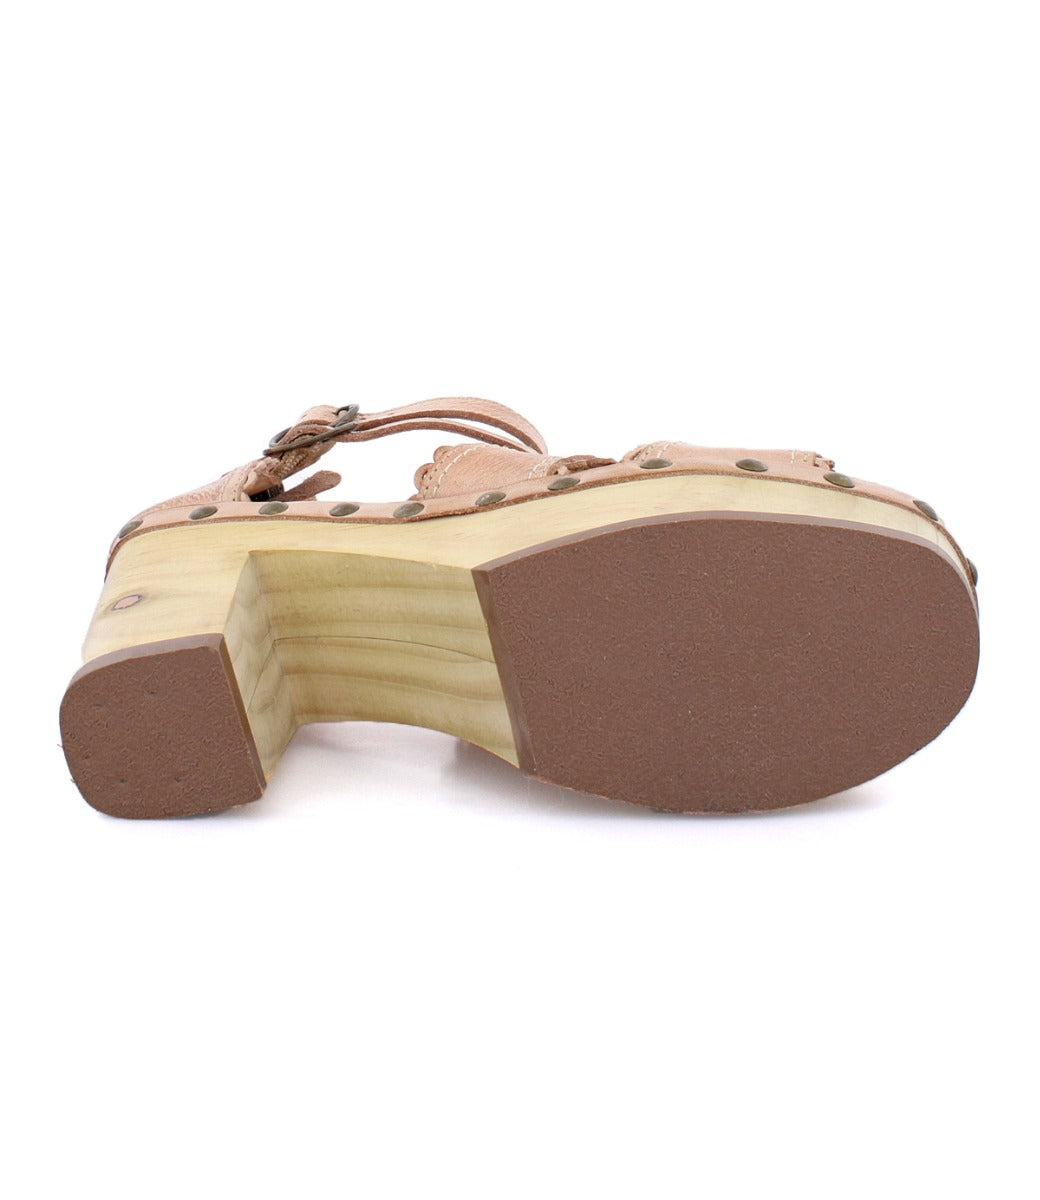 A pair of Bed Stu Sloane women's sandals with a wooden sole.